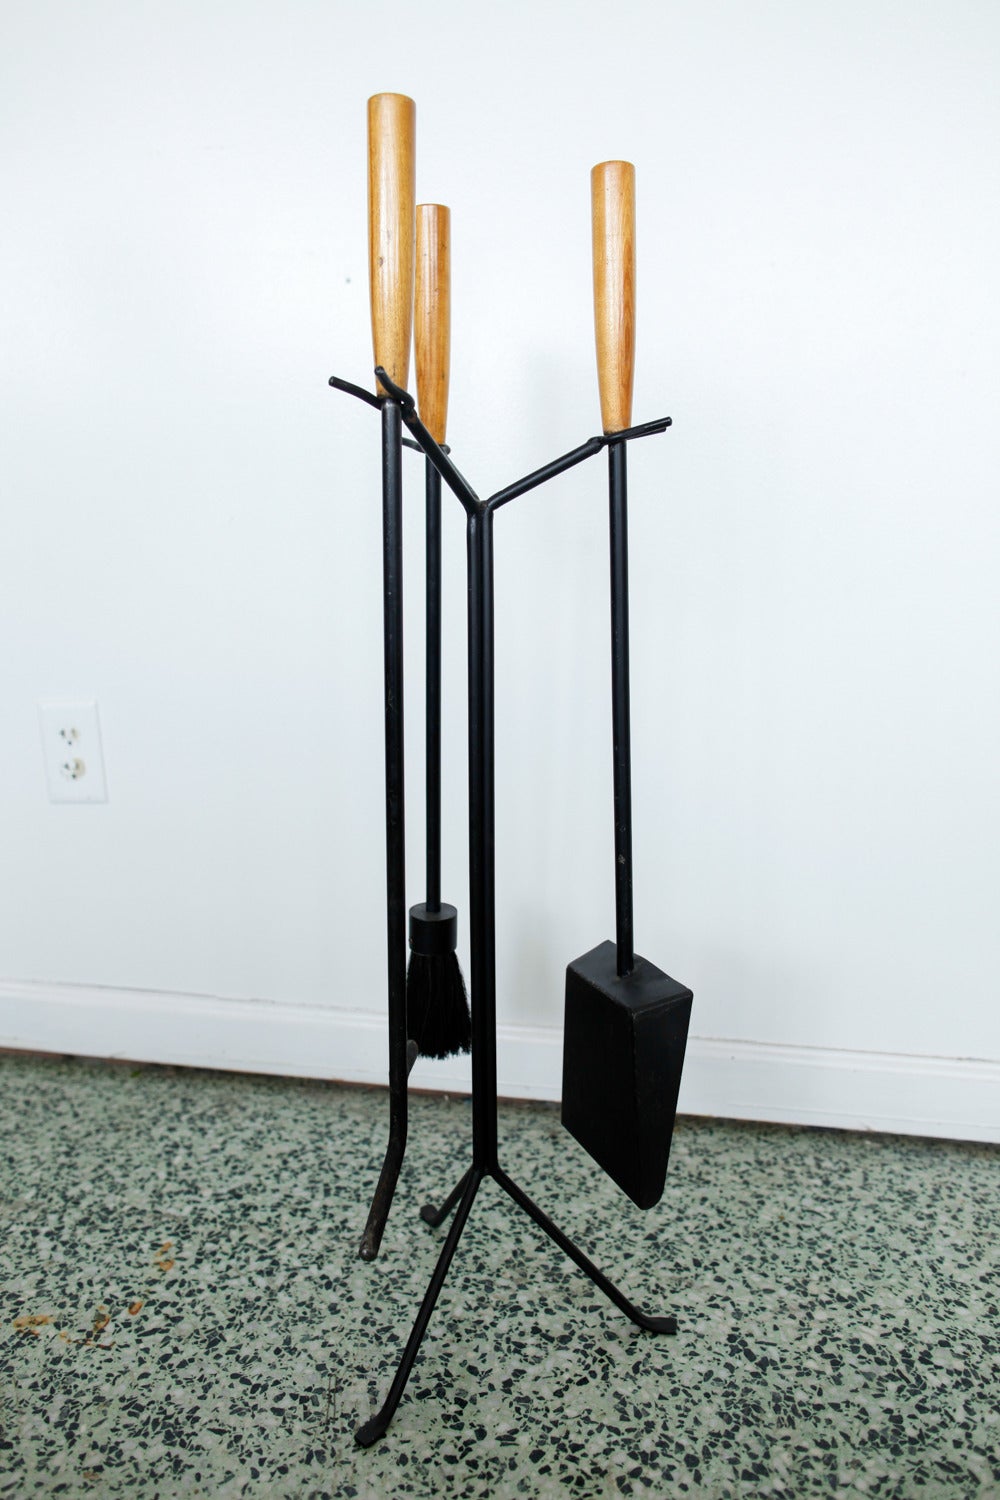 Rare and iconic painted or enameled iron and birch fireplace tool set designed by George Nelson for the Howard Miller Company. Listing includes Stand, brush, shovel, and poker. Very nice Mid-Century addition to your decor. 

Construction: Metal,